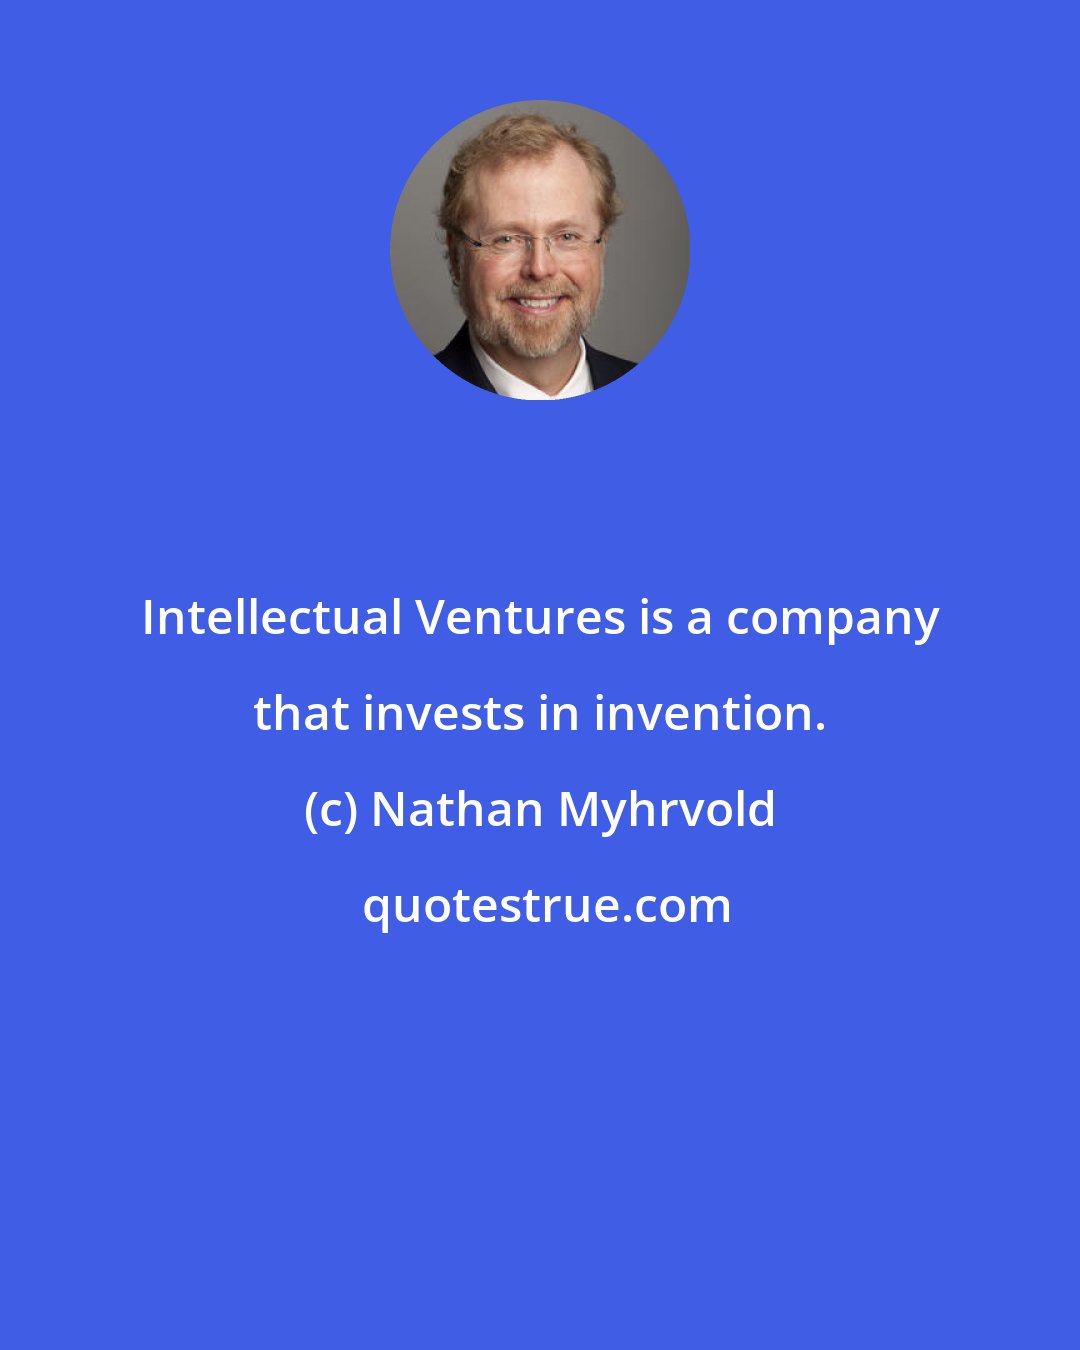 Nathan Myhrvold: Intellectual Ventures is a company that invests in invention.